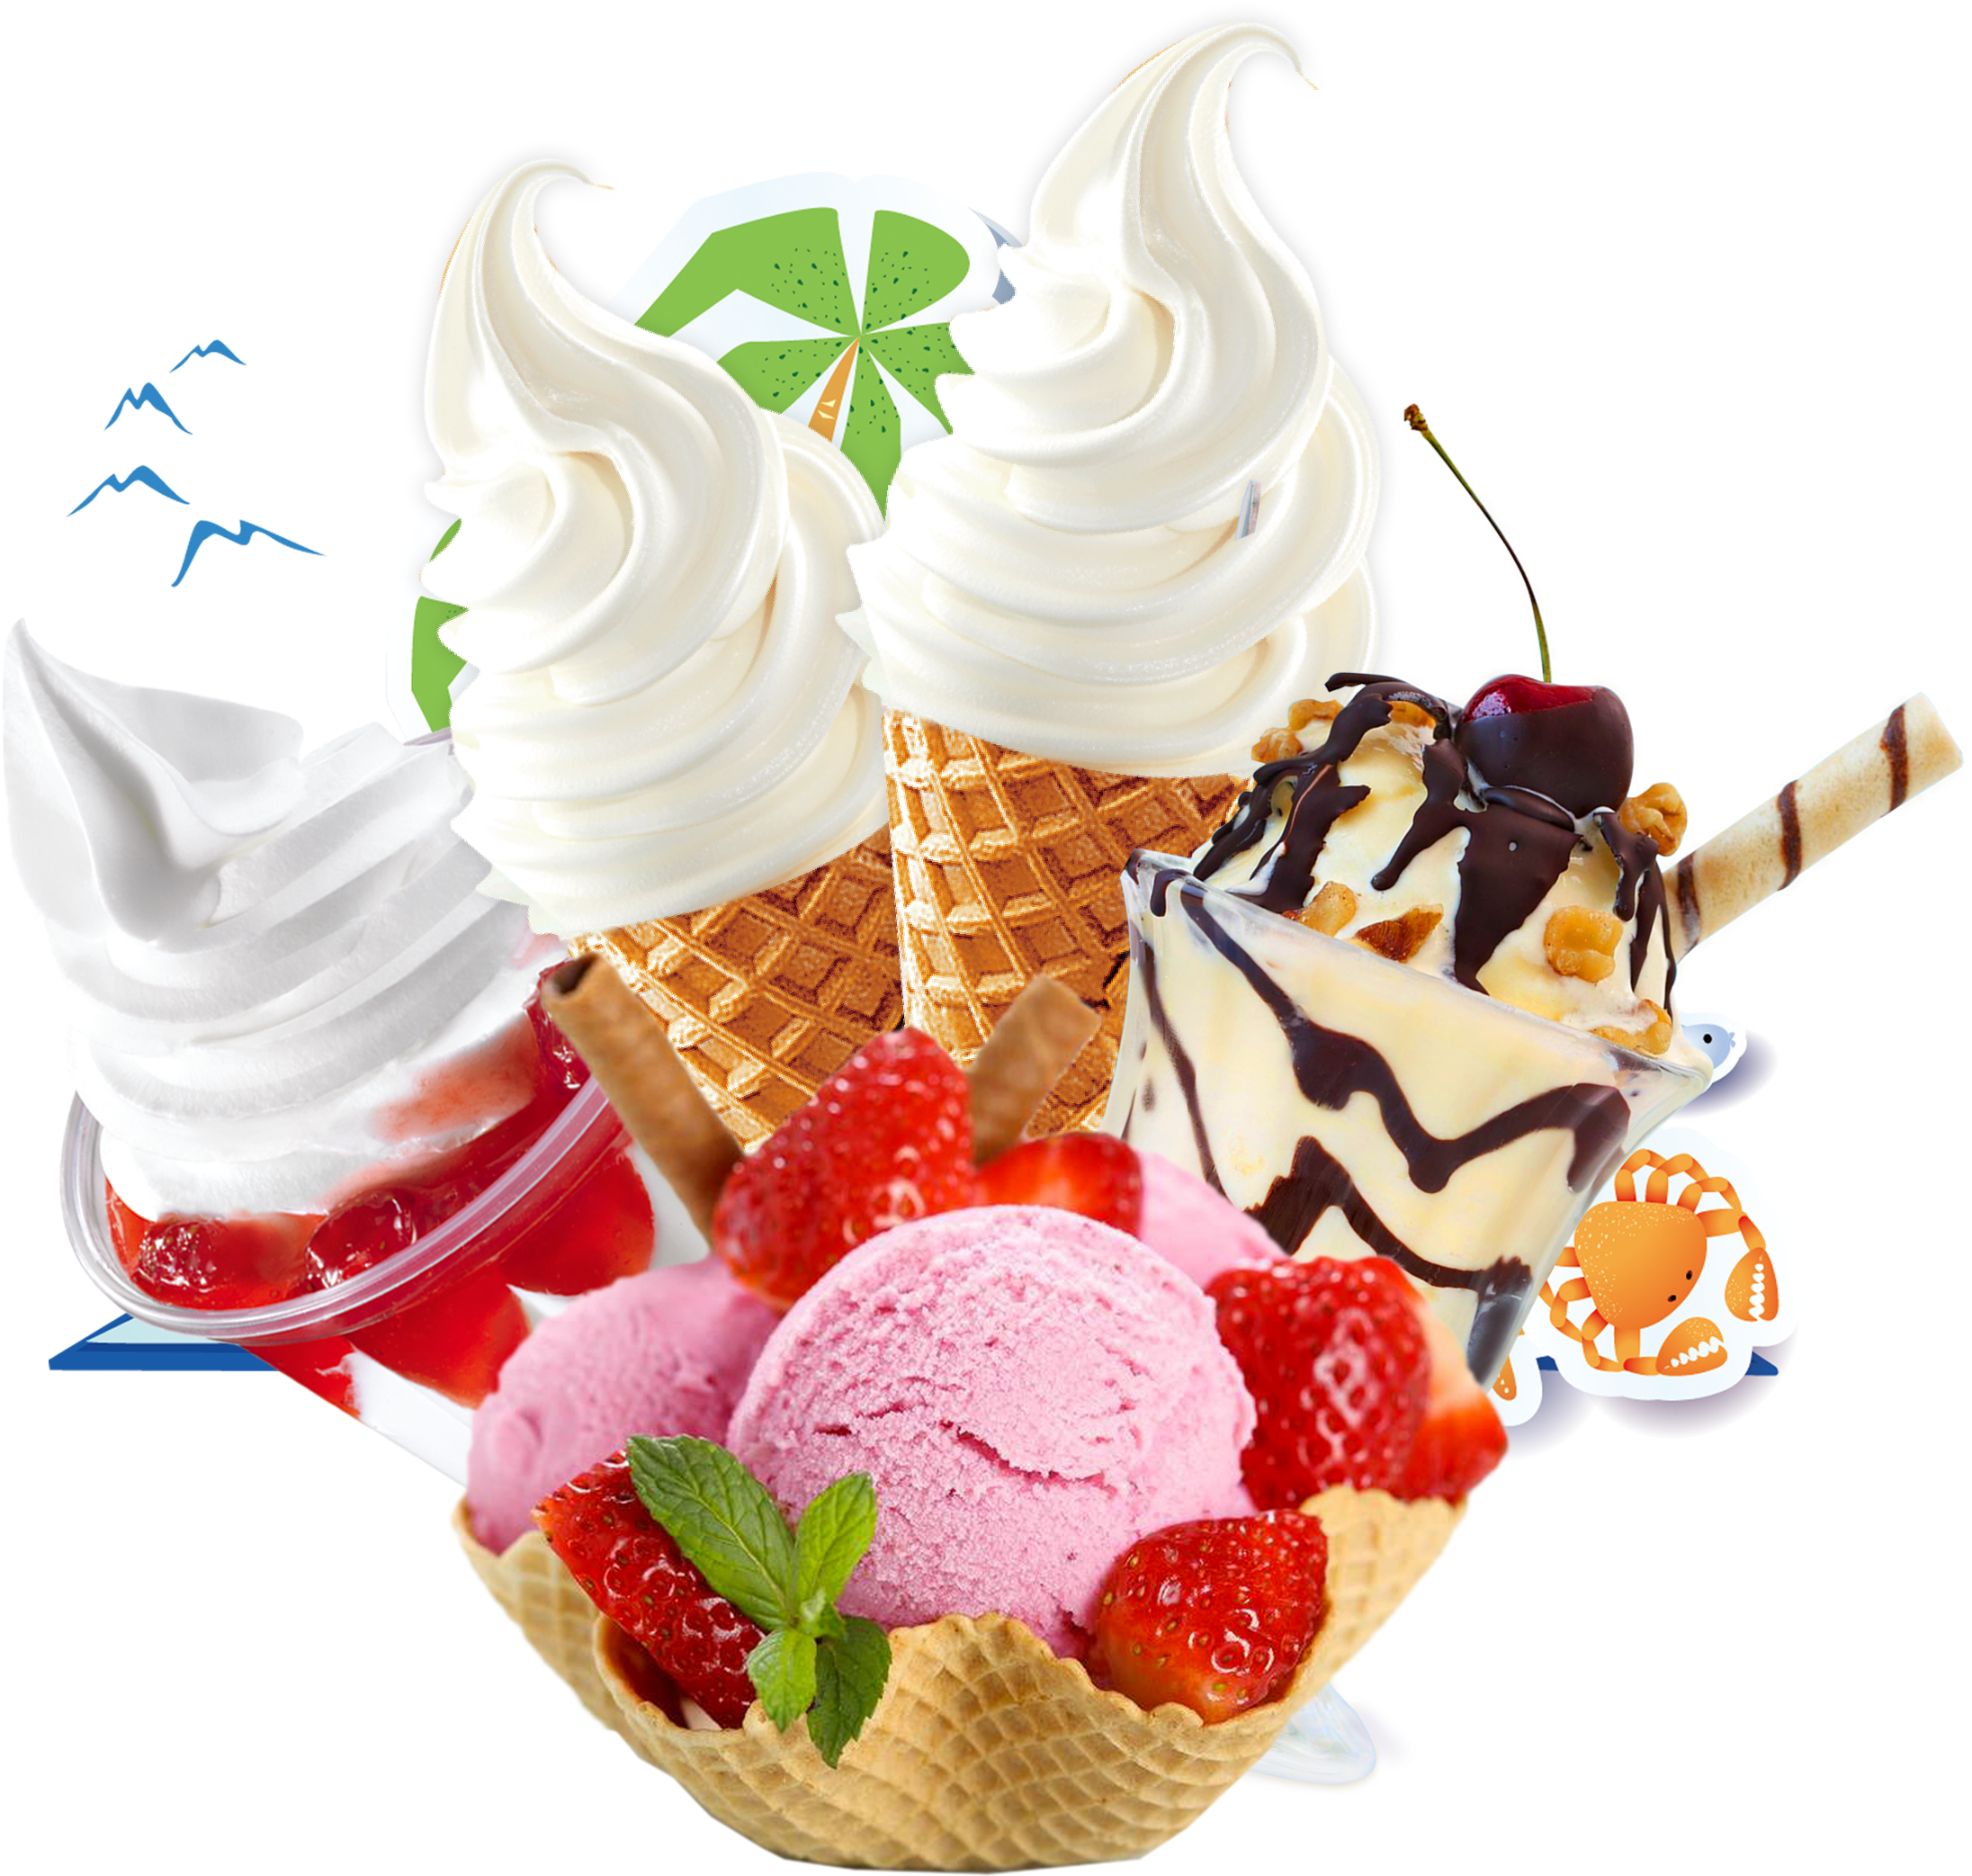 ice cream png download - 4096*4096 - Free Transparent Sundae png